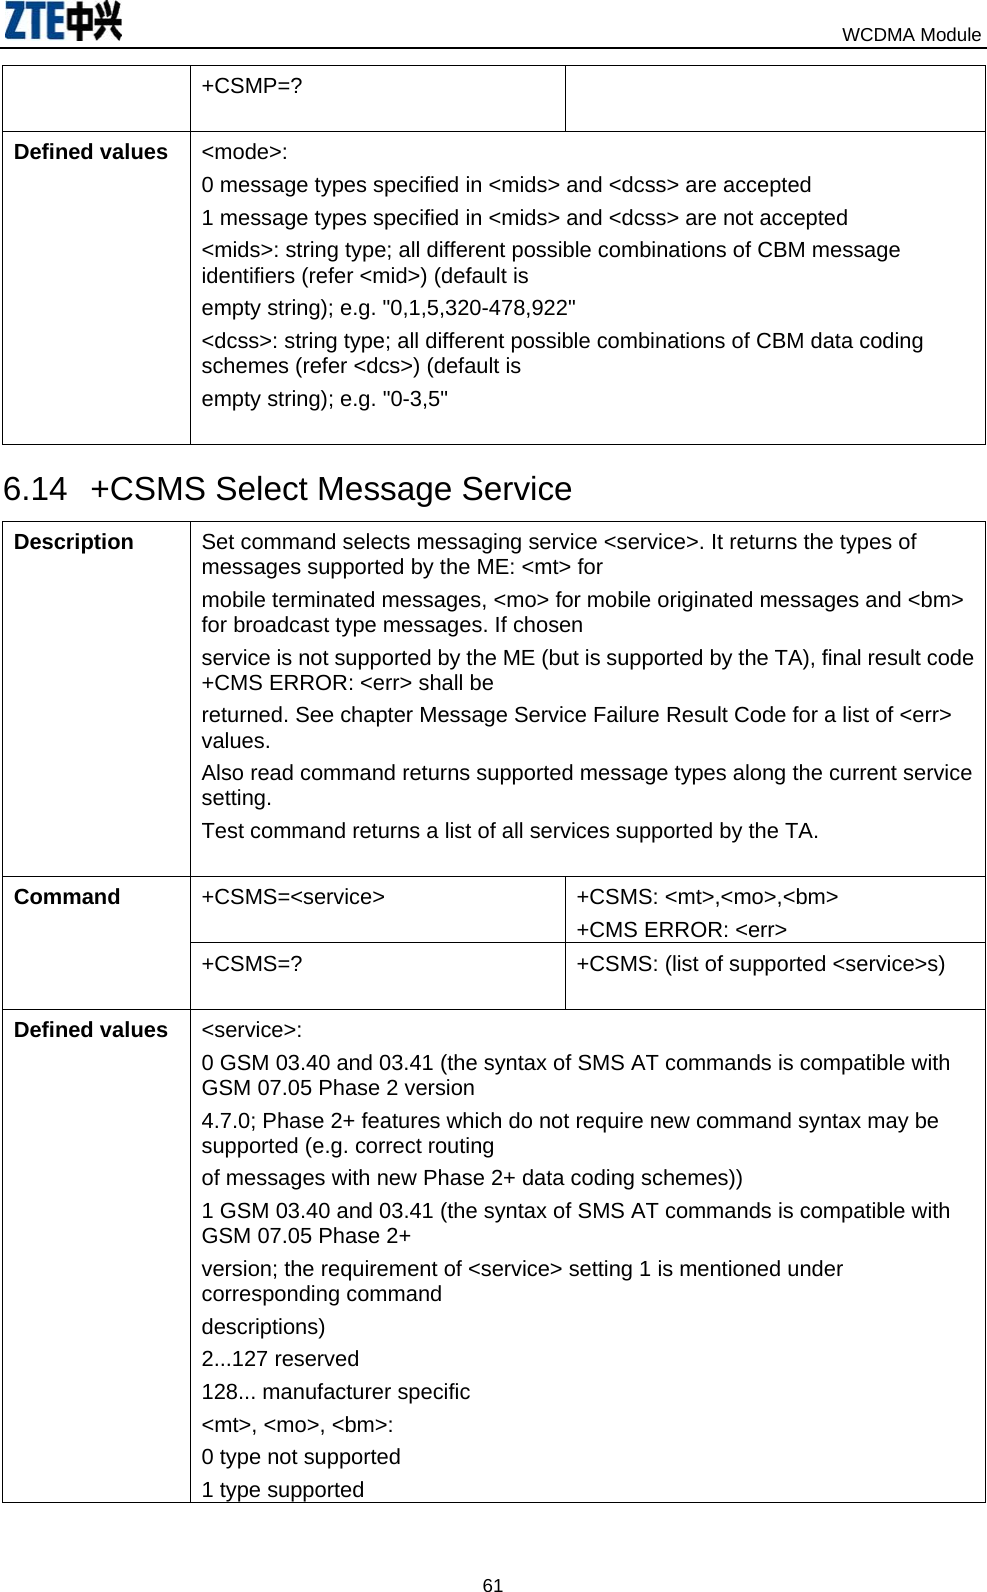                                                                            WCDMA Module  61+CSMP=?   Defined values  &lt;mode&gt;: 0 message types specified in &lt;mids&gt; and &lt;dcss&gt; are accepted 1 message types specified in &lt;mids&gt; and &lt;dcss&gt; are not accepted &lt;mids&gt;: string type; all different possible combinations of CBM message identifiers (refer &lt;mid&gt;) (default is empty string); e.g. &quot;0,1,5,320-478,922&quot; &lt;dcss&gt;: string type; all different possible combinations of CBM data coding schemes (refer &lt;dcs&gt;) (default is empty string); e.g. &quot;0-3,5&quot;  6.14  +CSMS Select Message Service Description  Set command selects messaging service &lt;service&gt;. It returns the types of messages supported by the ME: &lt;mt&gt; for mobile terminated messages, &lt;mo&gt; for mobile originated messages and &lt;bm&gt; for broadcast type messages. If chosen service is not supported by the ME (but is supported by the TA), final result code +CMS ERROR: &lt;err&gt; shall be returned. See chapter Message Service Failure Result Code for a list of &lt;err&gt; values. Also read command returns supported message types along the current service setting. Test command returns a list of all services supported by the TA.  +CSMS=&lt;service&gt;  +CSMS: &lt;mt&gt;,&lt;mo&gt;,&lt;bm&gt; +CMS ERROR: &lt;err&gt; Command  +CSMS=?  +CSMS: (list of supported &lt;service&gt;s)  Defined values  &lt;service&gt;: 0 GSM 03.40 and 03.41 (the syntax of SMS AT commands is compatible with GSM 07.05 Phase 2 version 4.7.0; Phase 2+ features which do not require new command syntax may be supported (e.g. correct routing of messages with new Phase 2+ data coding schemes)) 1 GSM 03.40 and 03.41 (the syntax of SMS AT commands is compatible with GSM 07.05 Phase 2+ version; the requirement of &lt;service&gt; setting 1 is mentioned under corresponding command descriptions) 2...127 reserved 128... manufacturer specific &lt;mt&gt;, &lt;mo&gt;, &lt;bm&gt;: 0 type not supported 1 type supported 